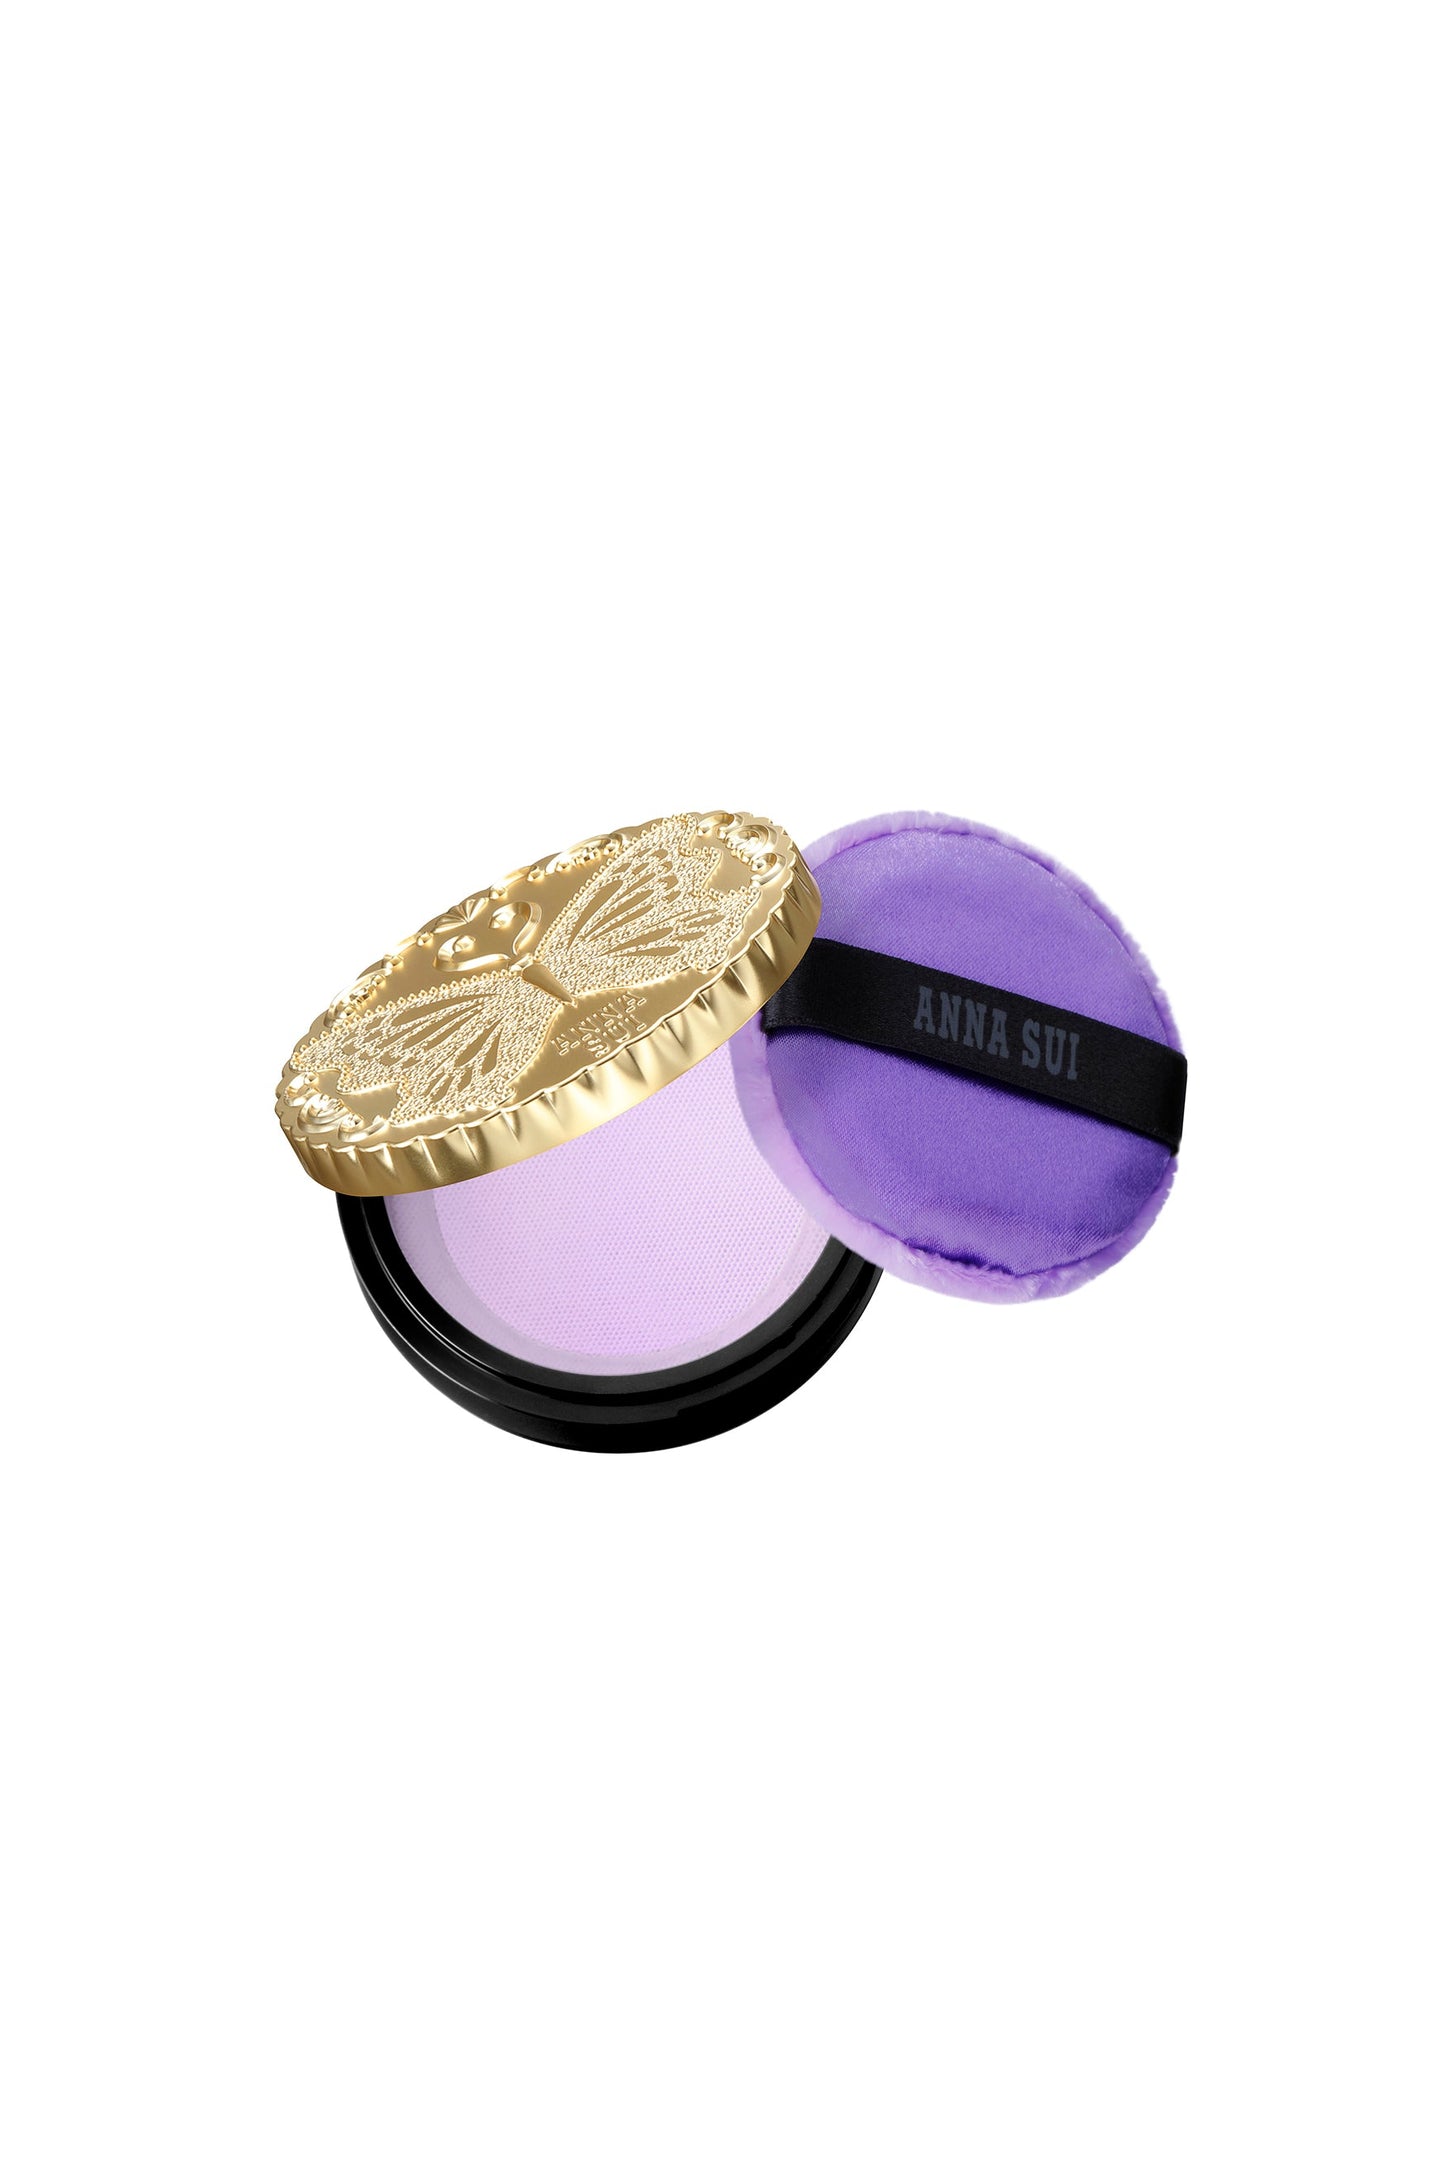 Classic Loose Powder gold round box with a butterfly engrave on top, 200: powder, and sponge